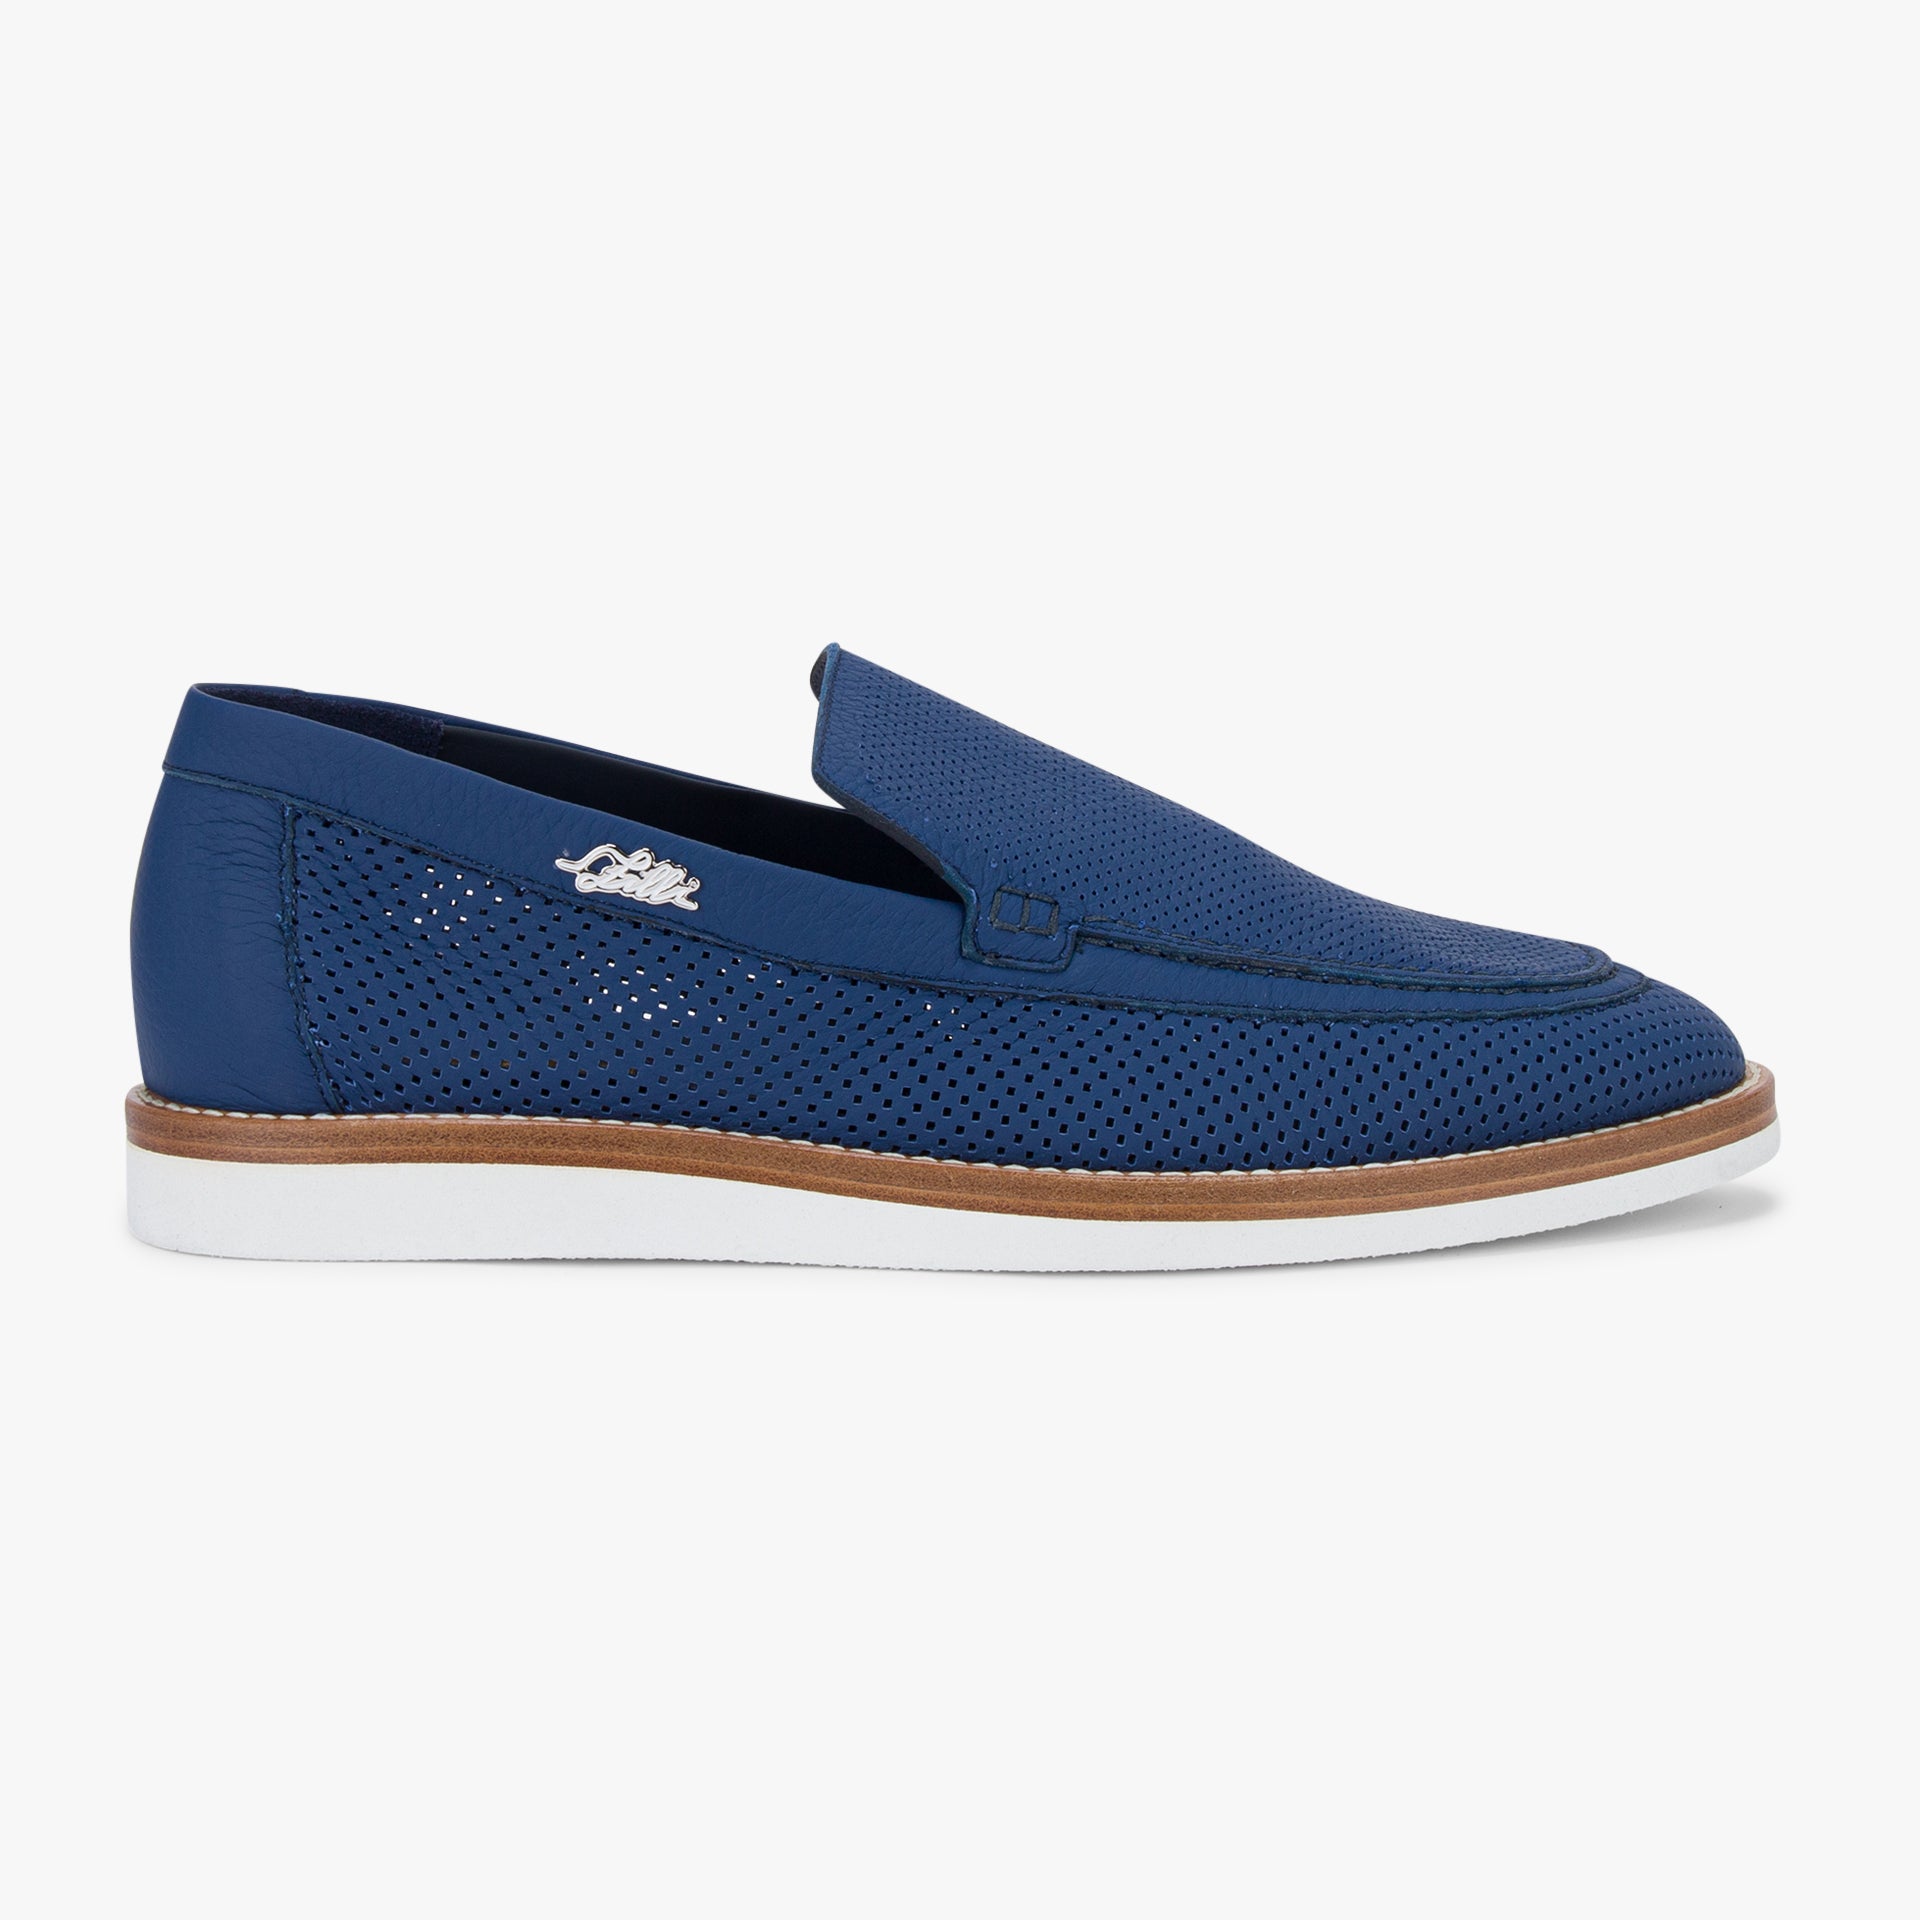 Full Perforated Deerskin Moccassin